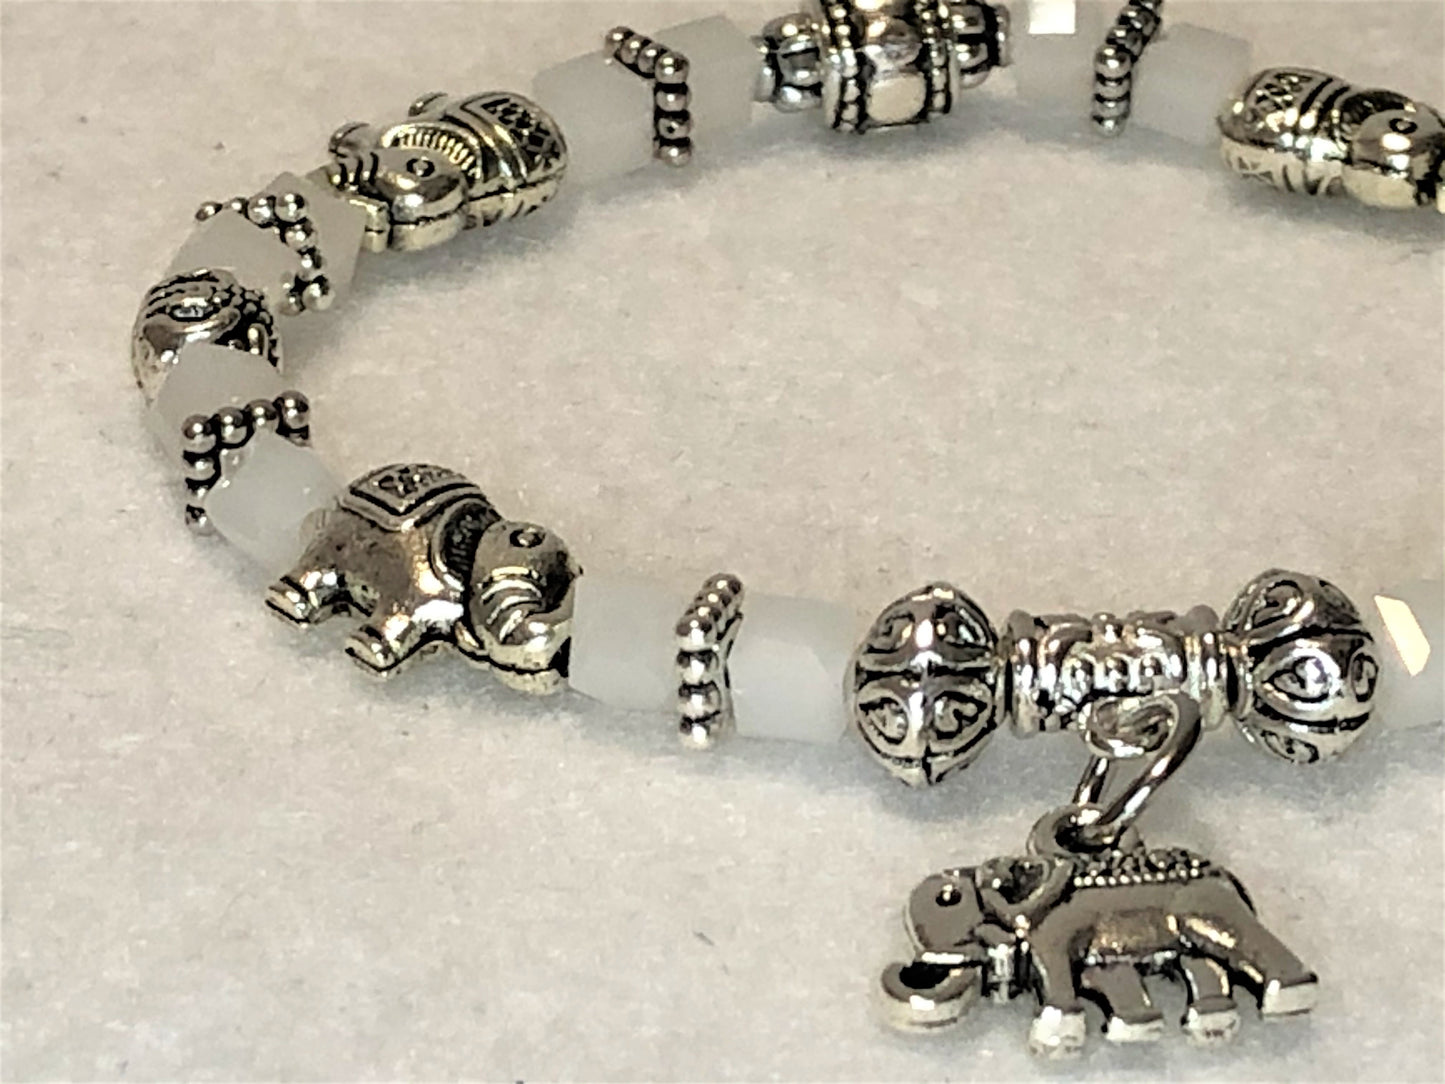 Elephant Stretch Bracelet - Crystal Bead Bracelet 13 Colors - ICE WHITE , Good Luck Strength and Wisdom Symbol - Cheer and Dance On Demand